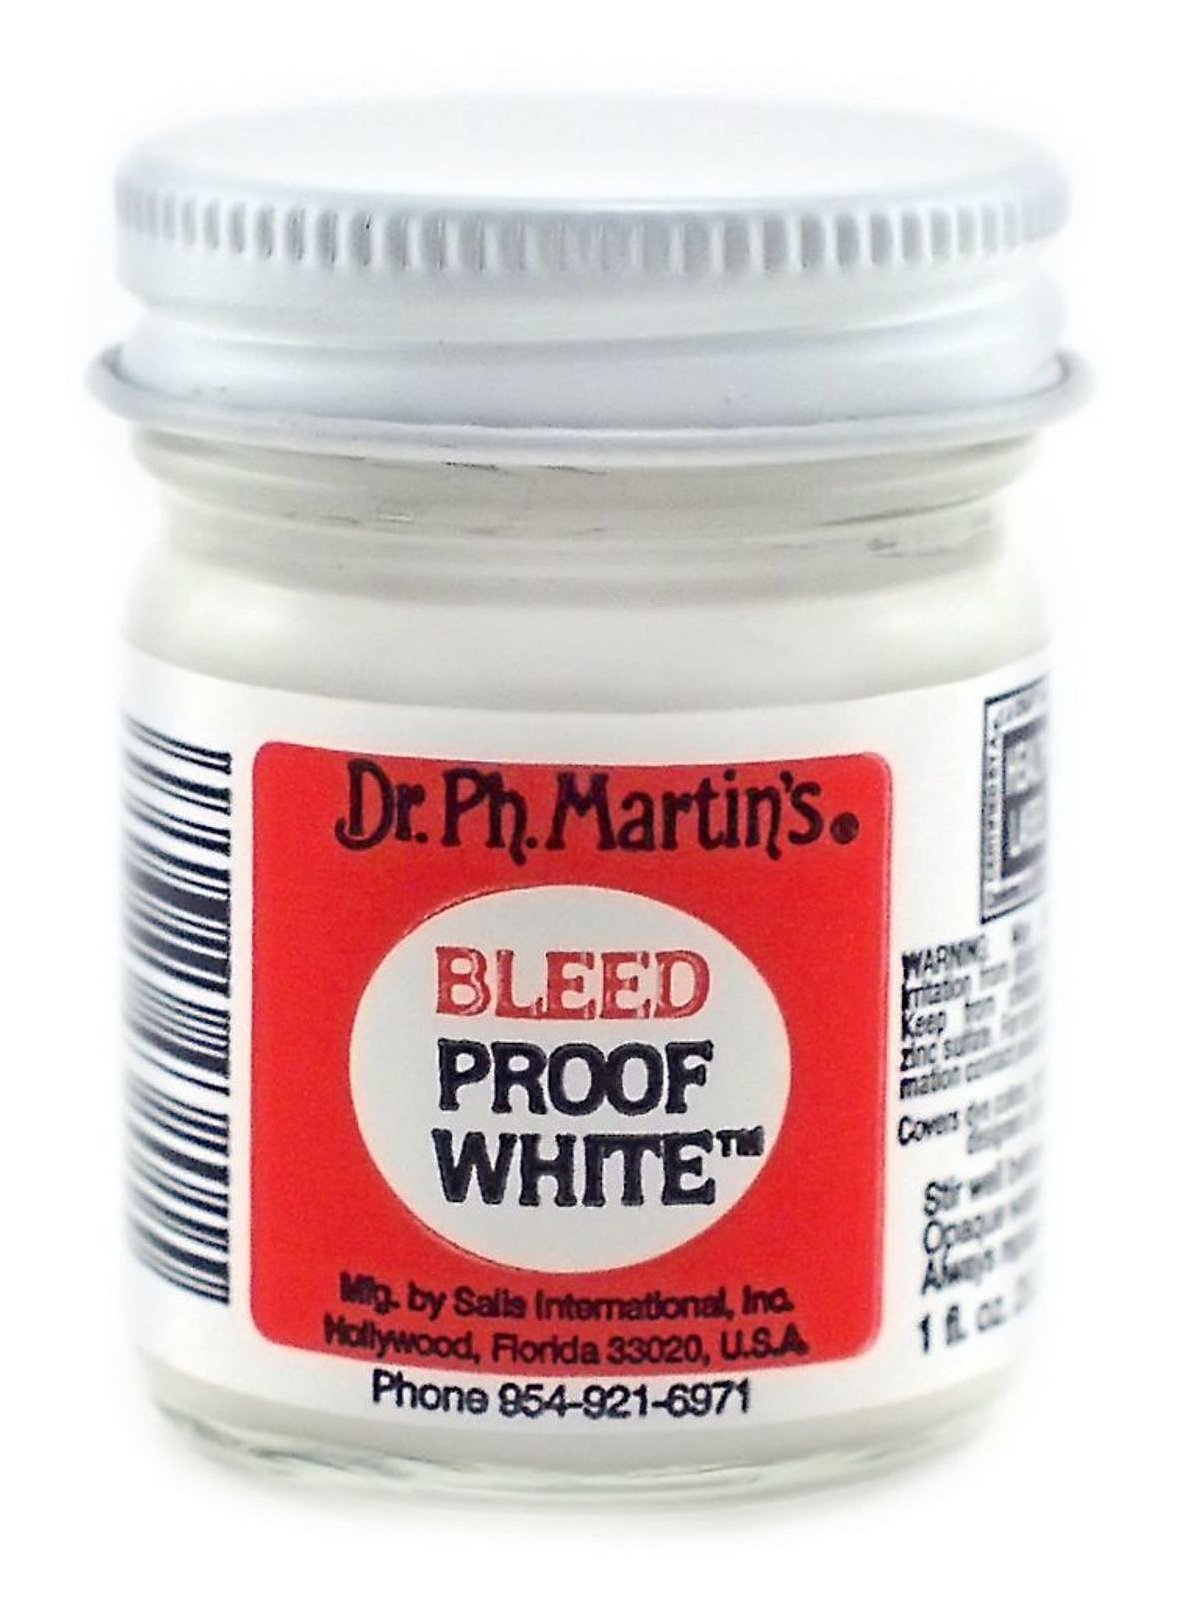 Dr. Ph. Martin's BLEED PROOF WHITE Watercolour Paint